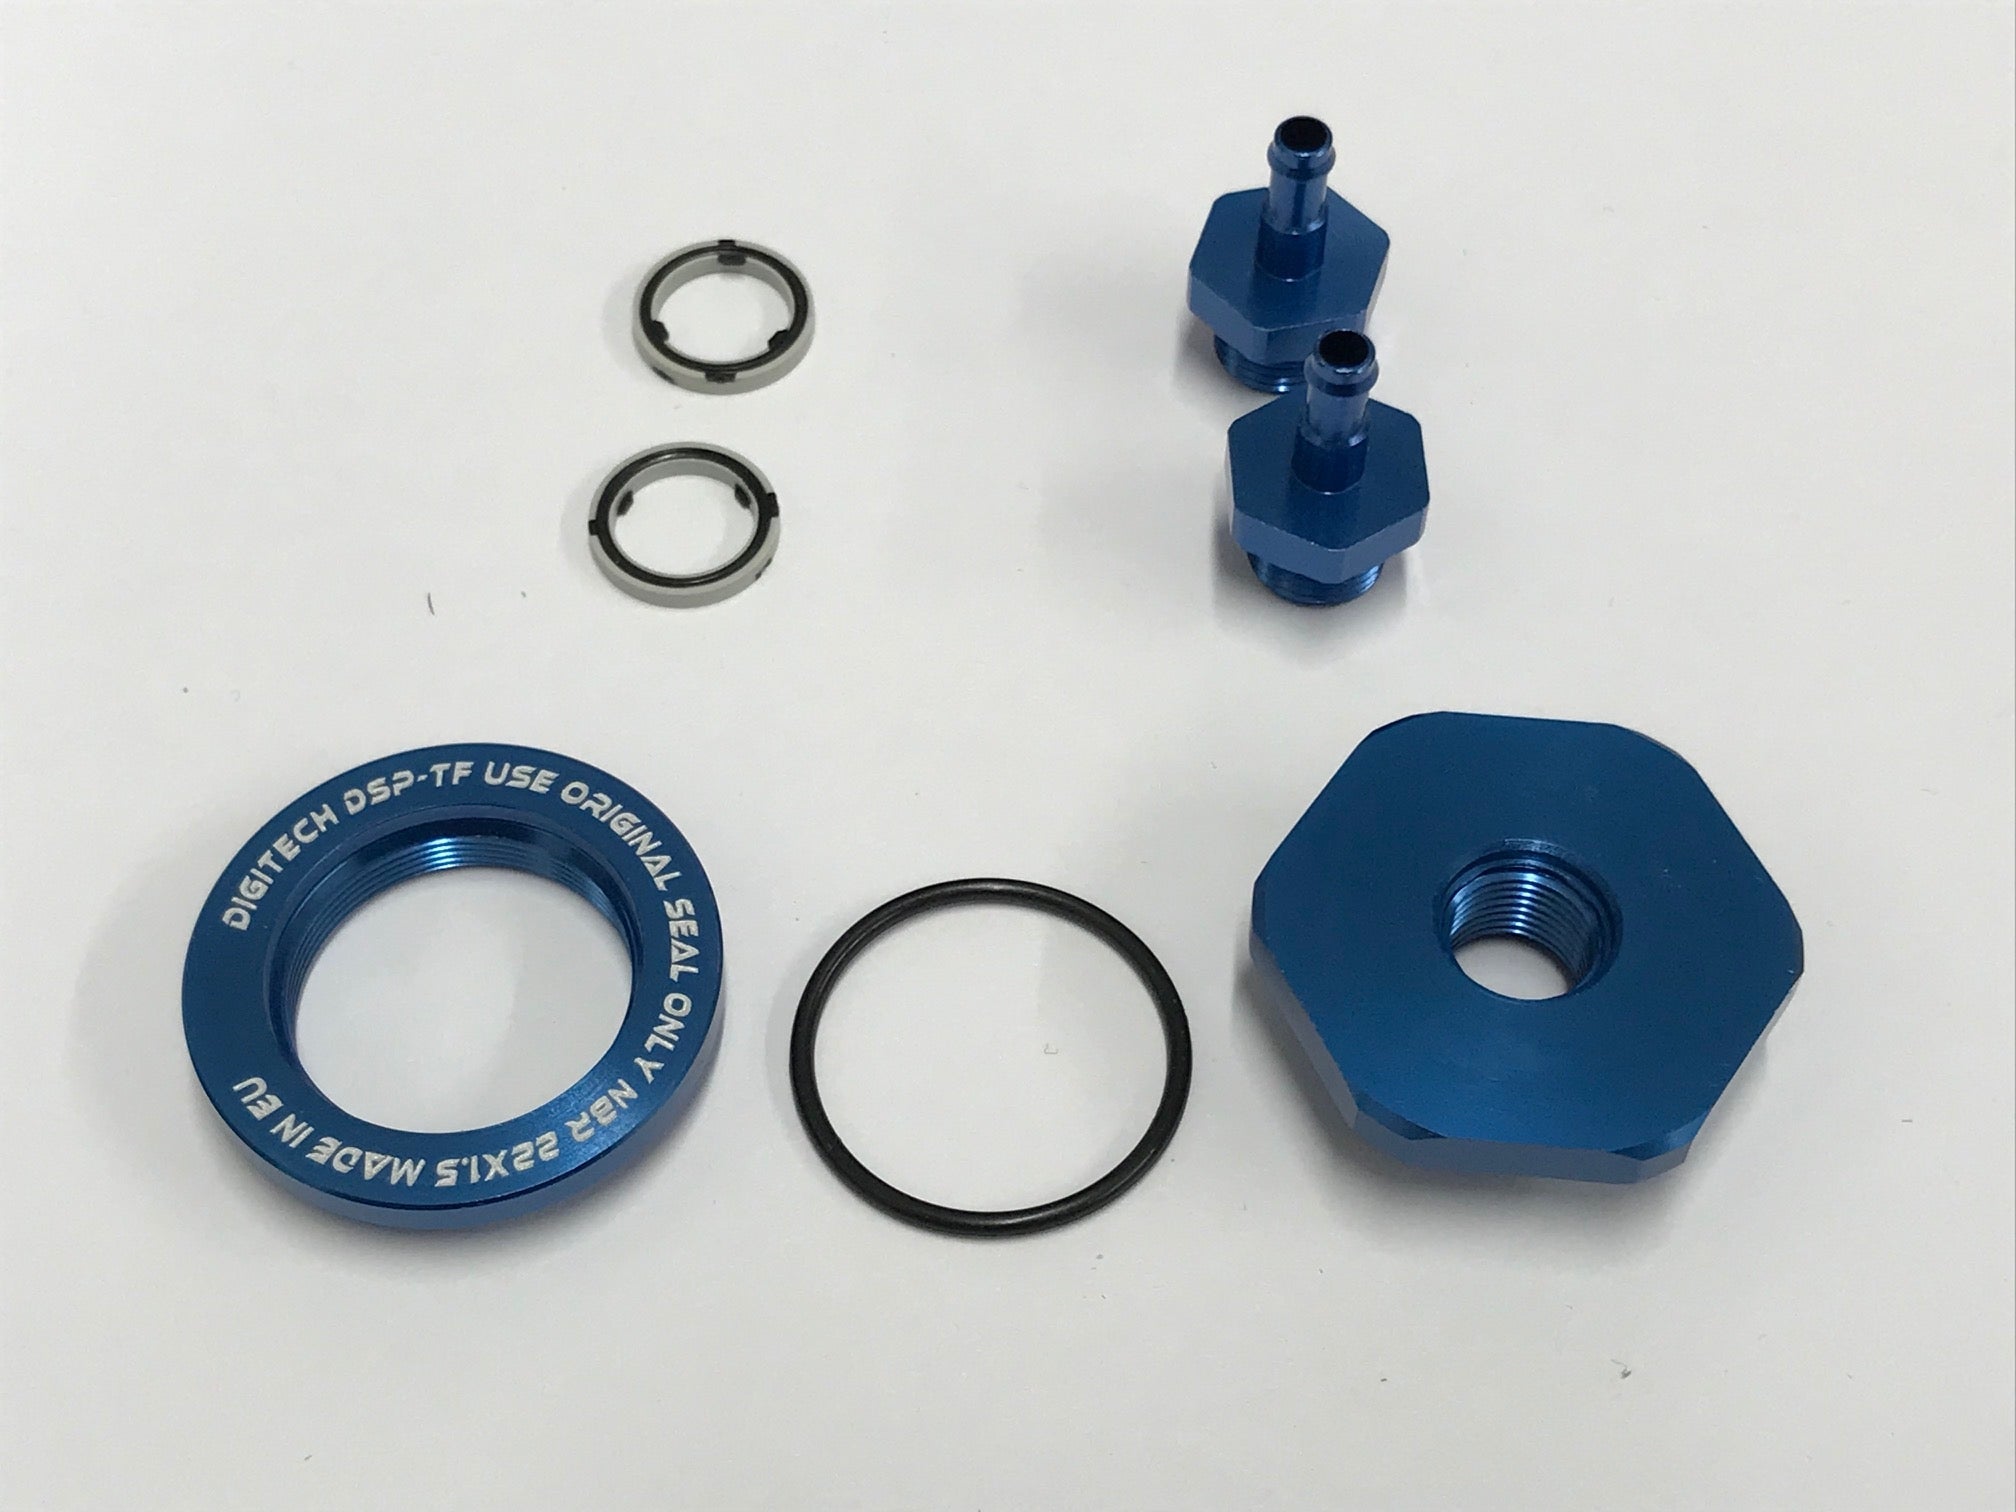 Digitech High Flow Fuel Tank Fitting Barbed for 8mm Festo Tube or 5/32 Tygon Tube